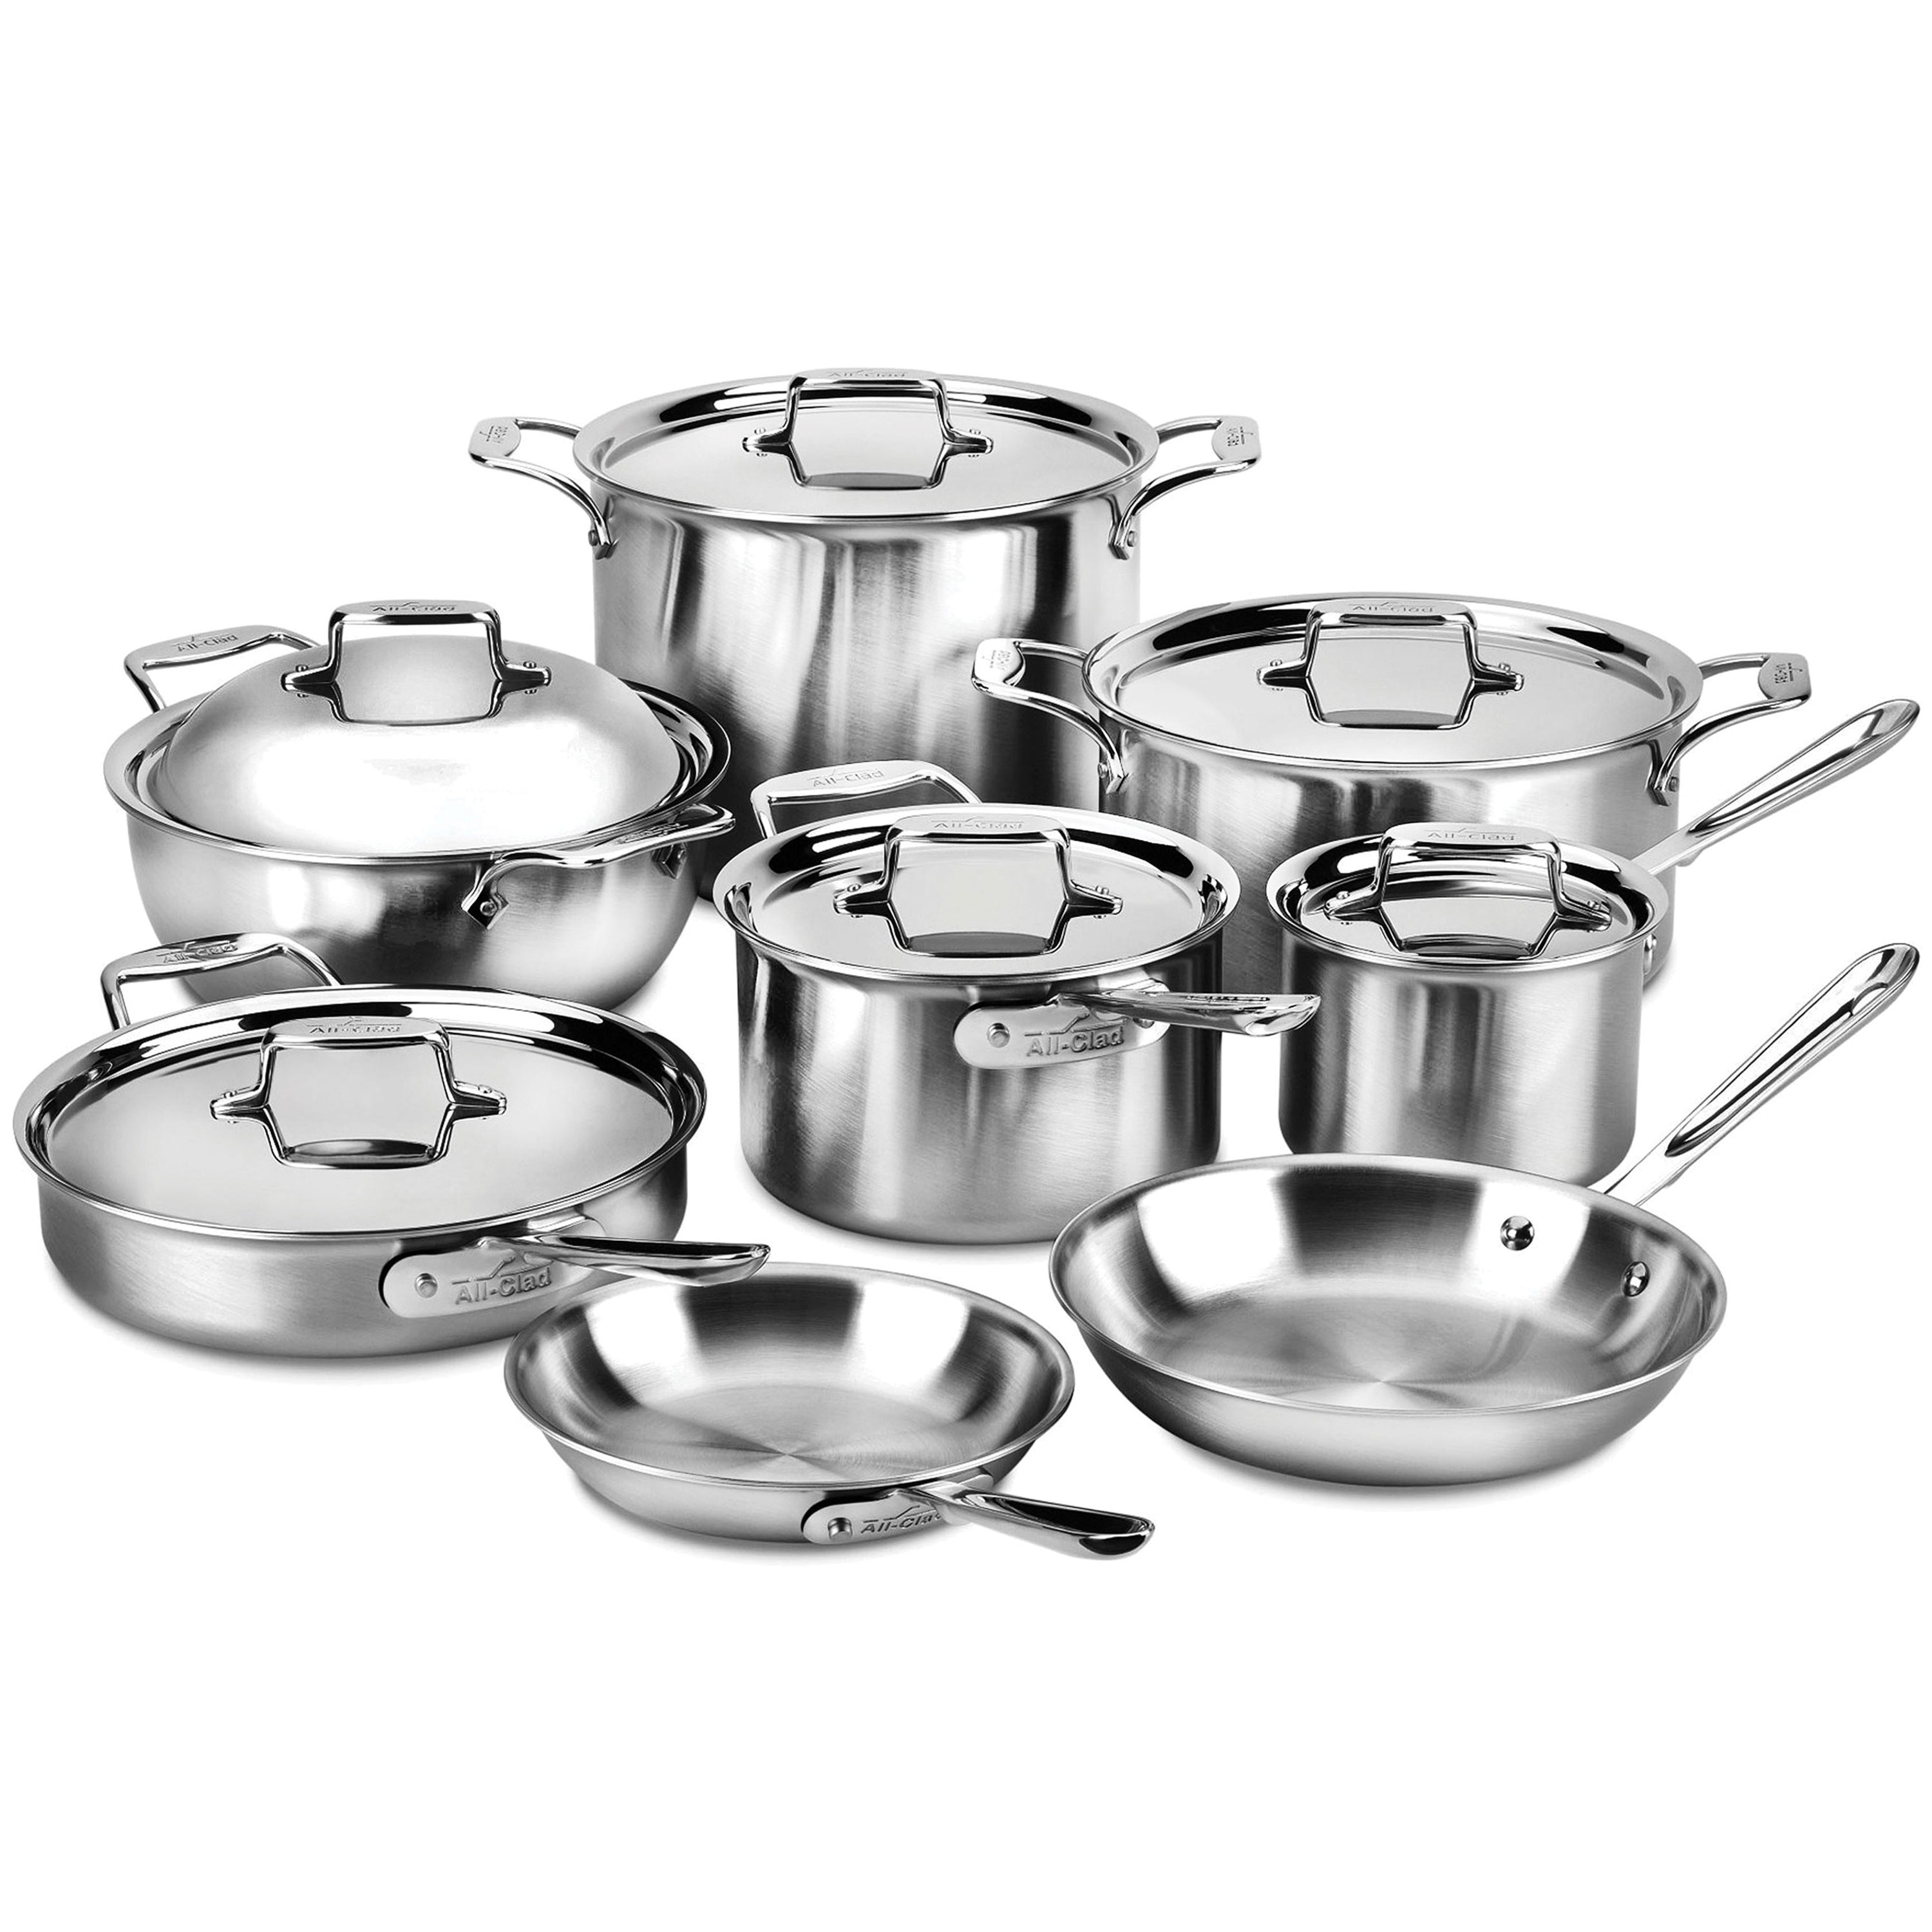 All-Clad D5 Brushed Stainless Steel 10-Pc. Cookware Set Brand New